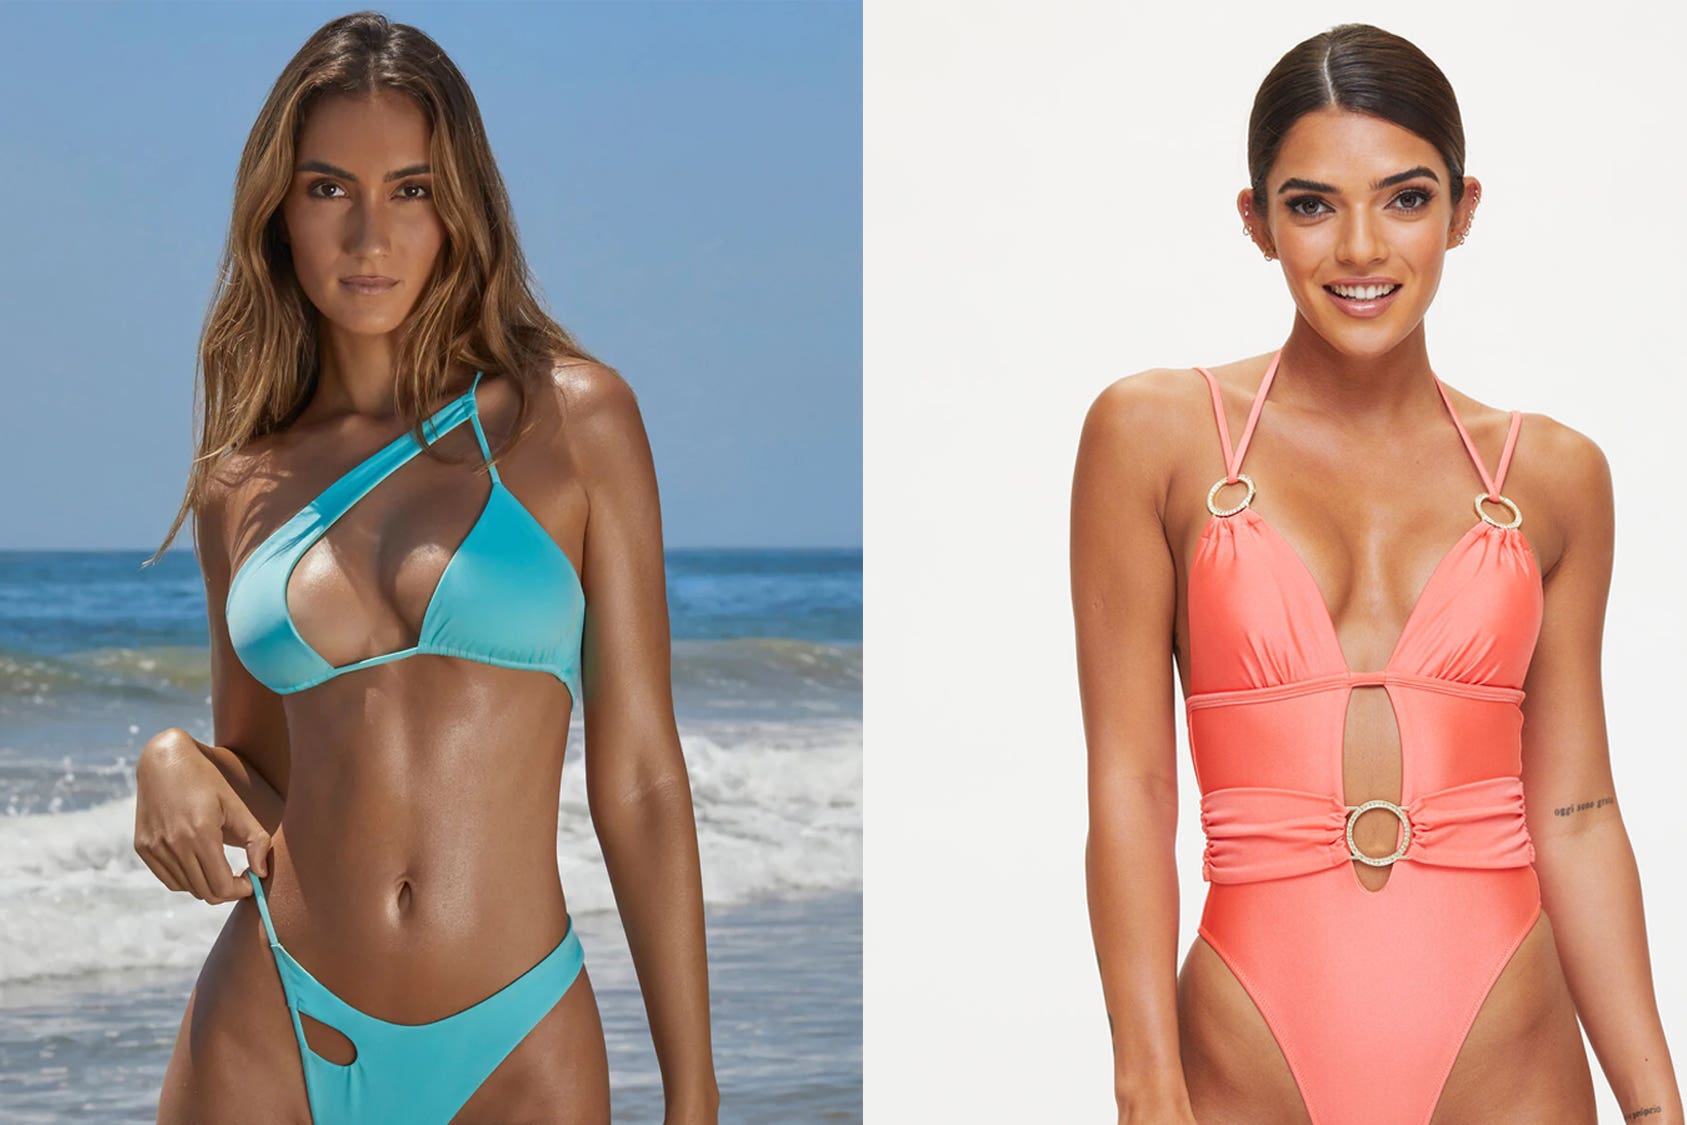 Asymmetric cuts and bejewelled details have proved popular on Love Island (Neena Swim/Ann Summers/PA)